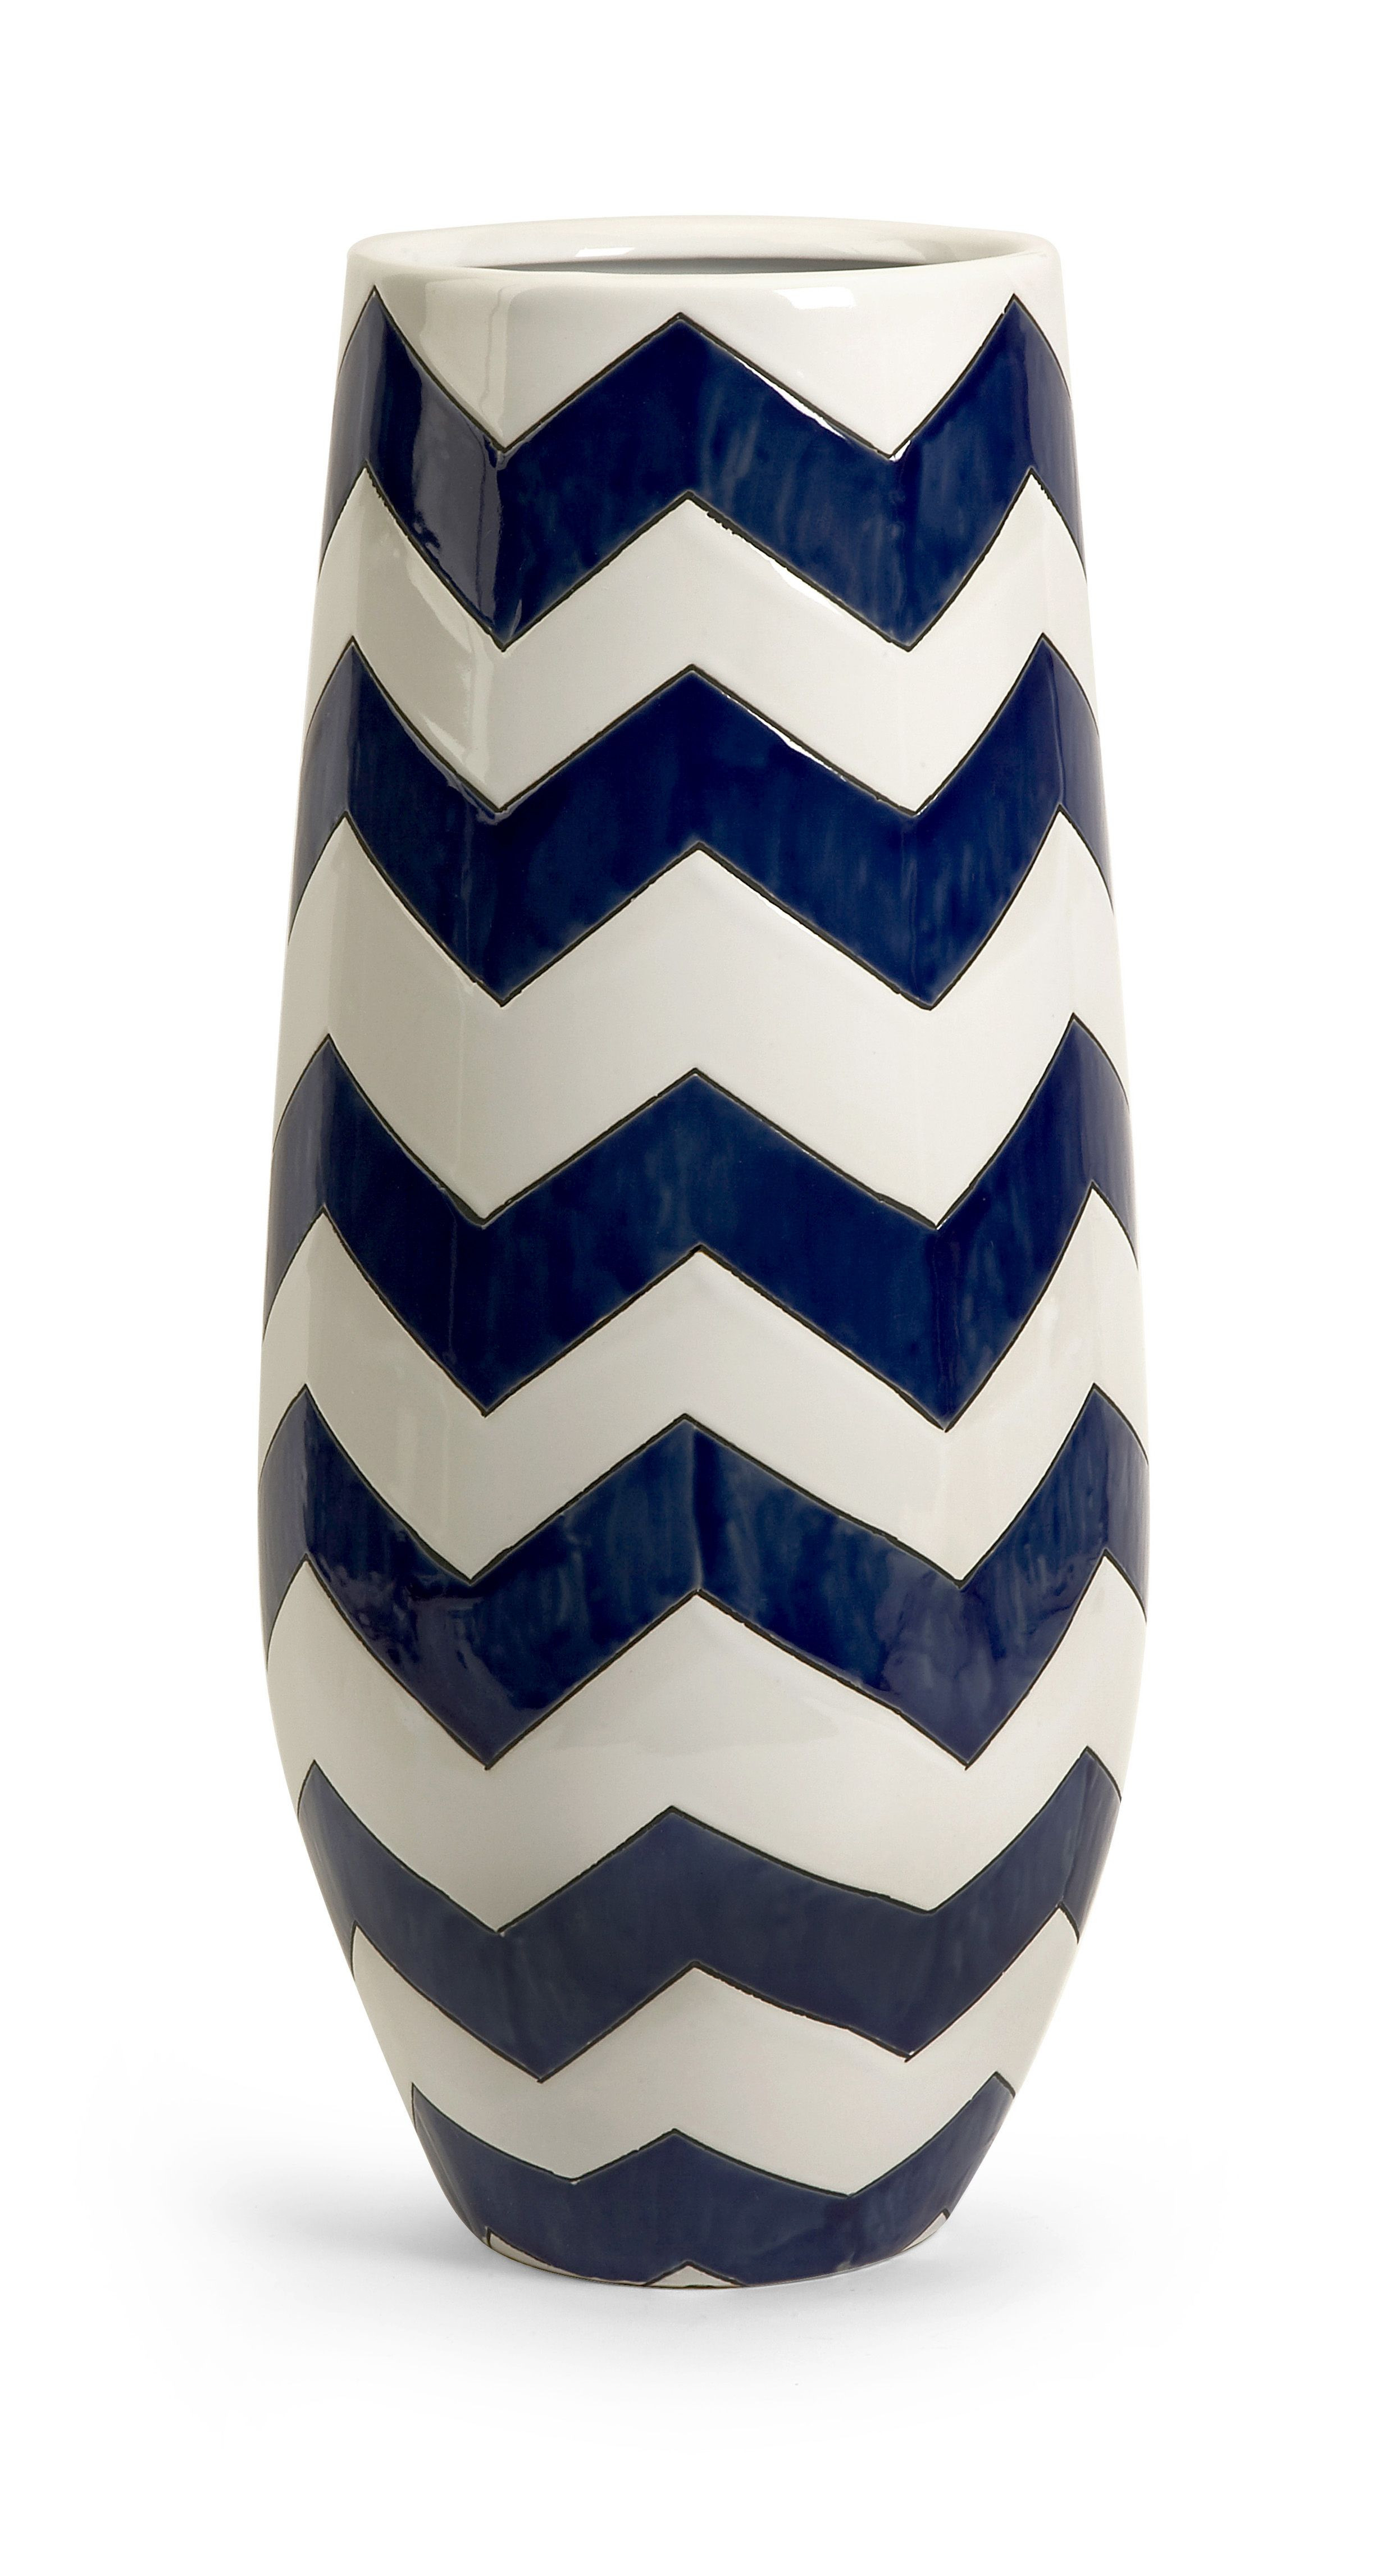 26 Lovable Tall Thin Blue Vase 2024 free download tall thin blue vase of all who see the chevron vase in person will be mesmerized by its in all who see the chevron vase in person will be mesmerized by its beauty want to know more click on 